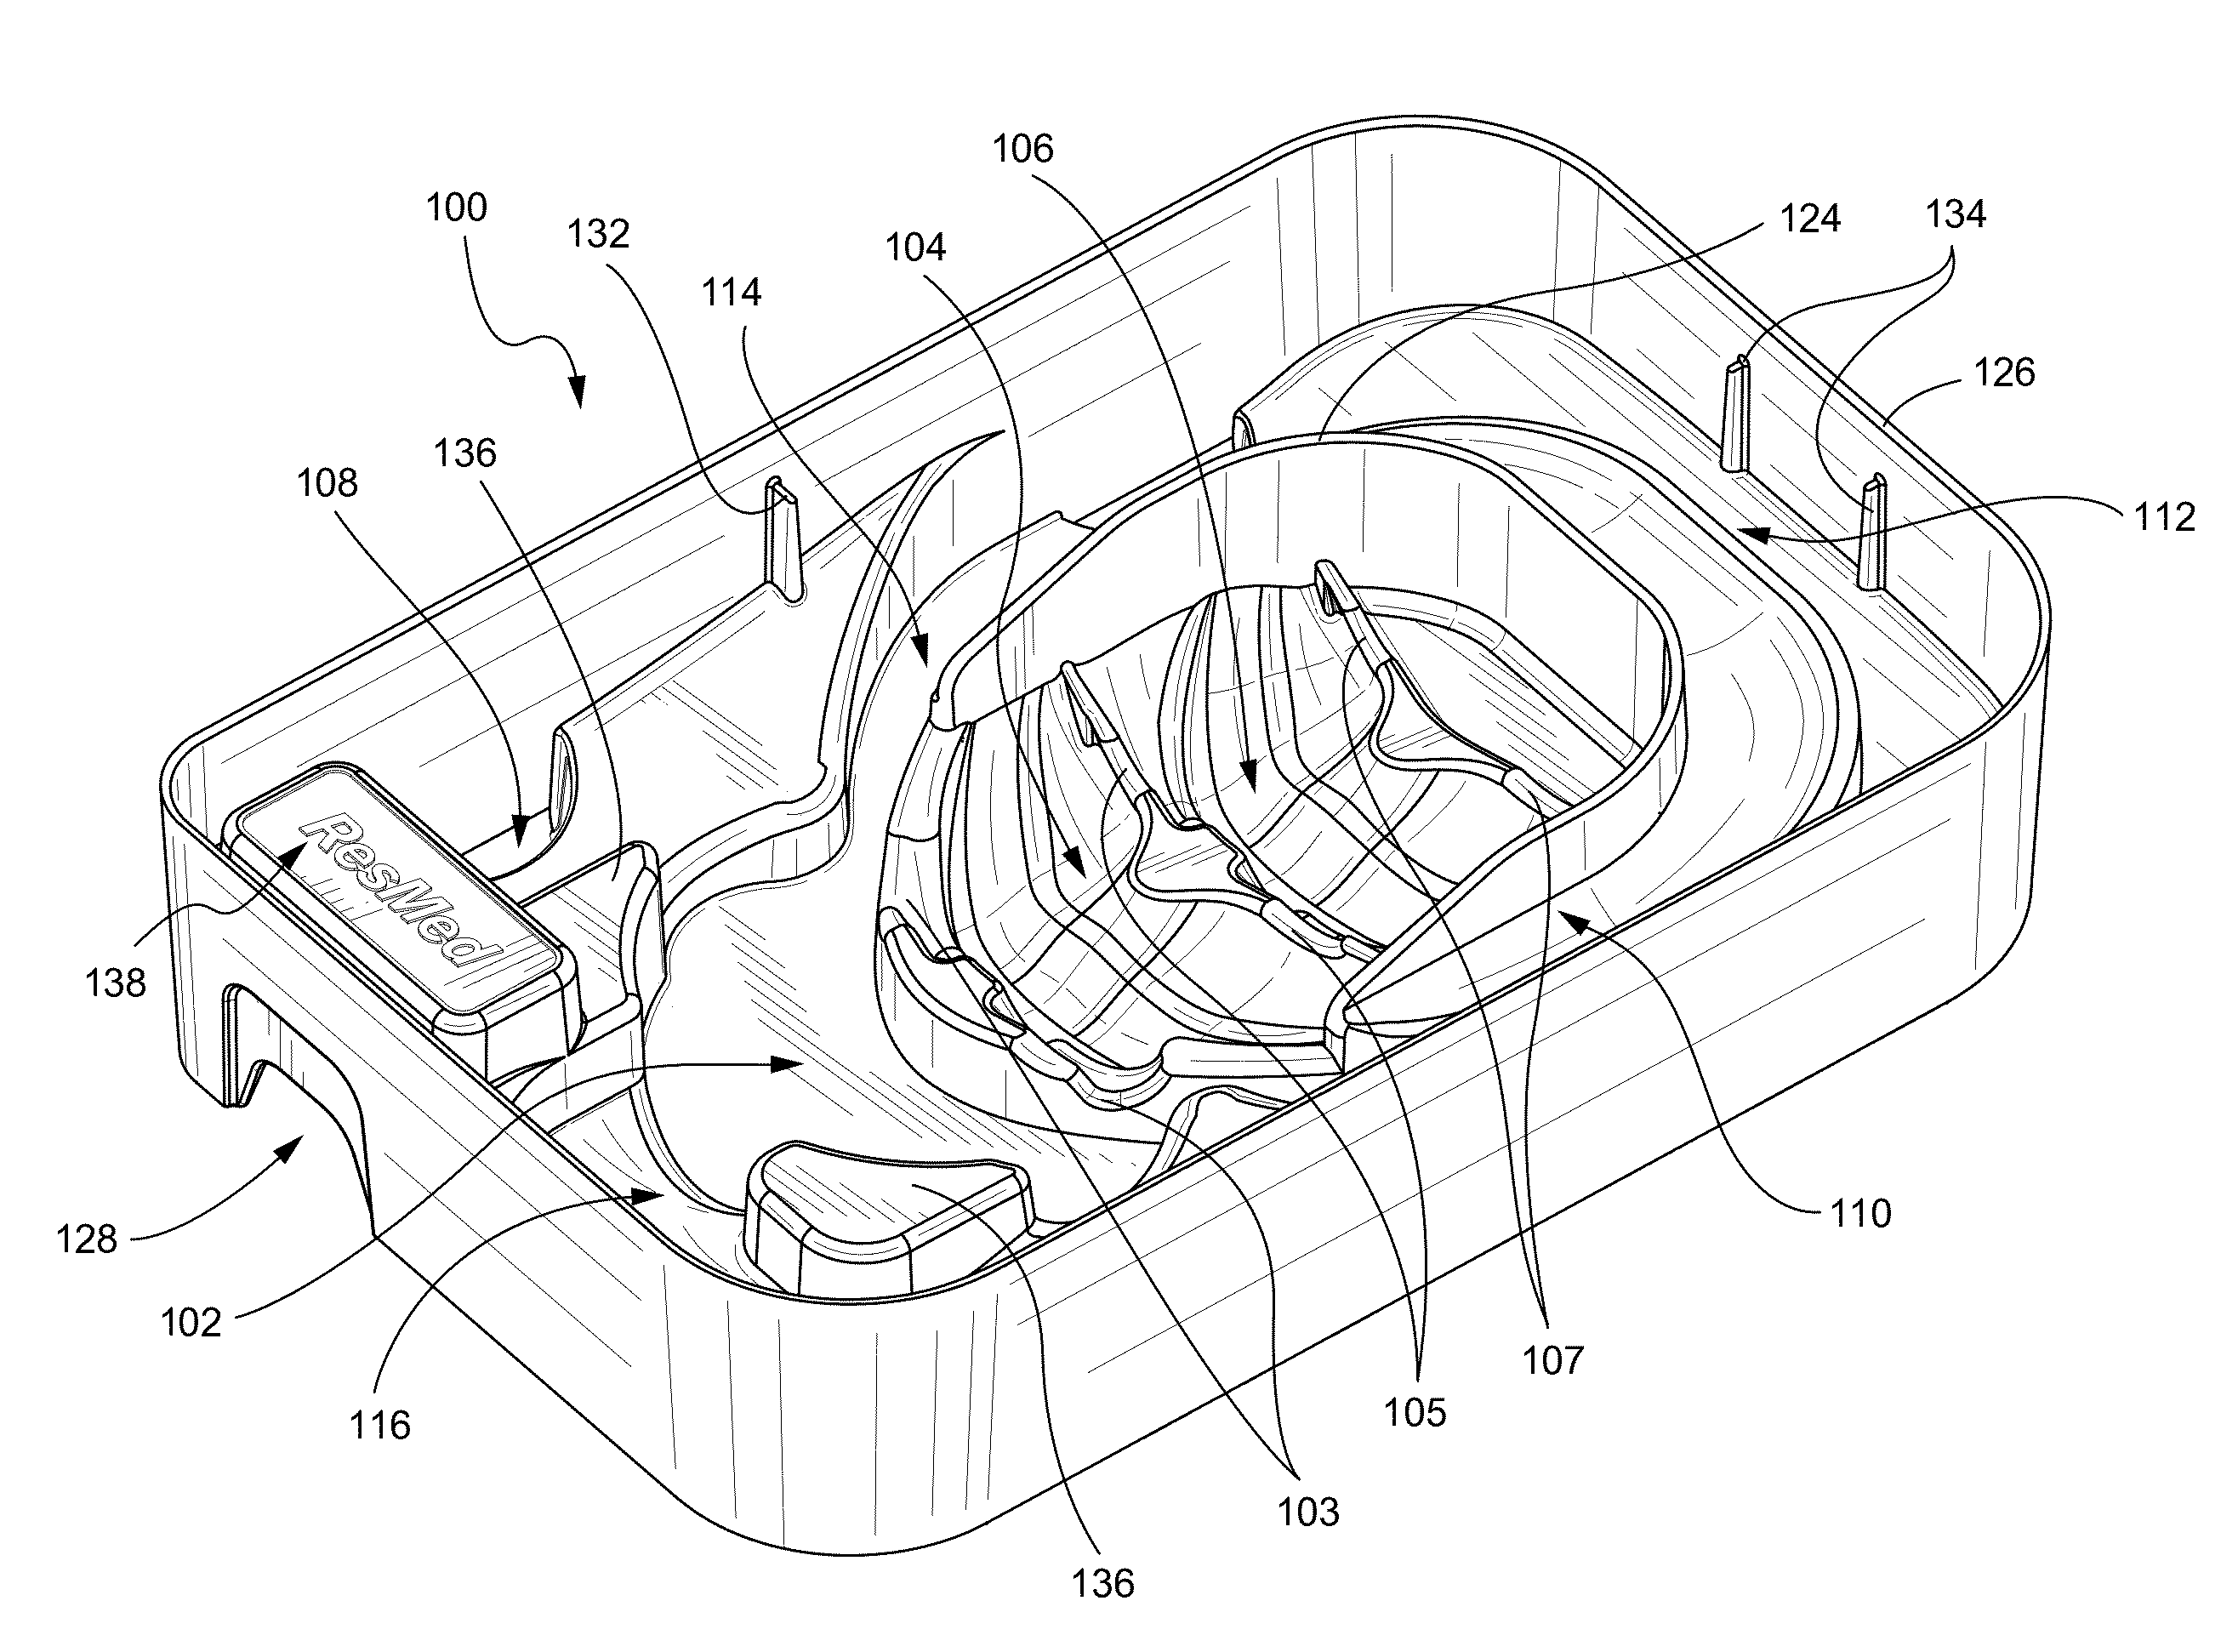 Packaging system for patient interface system